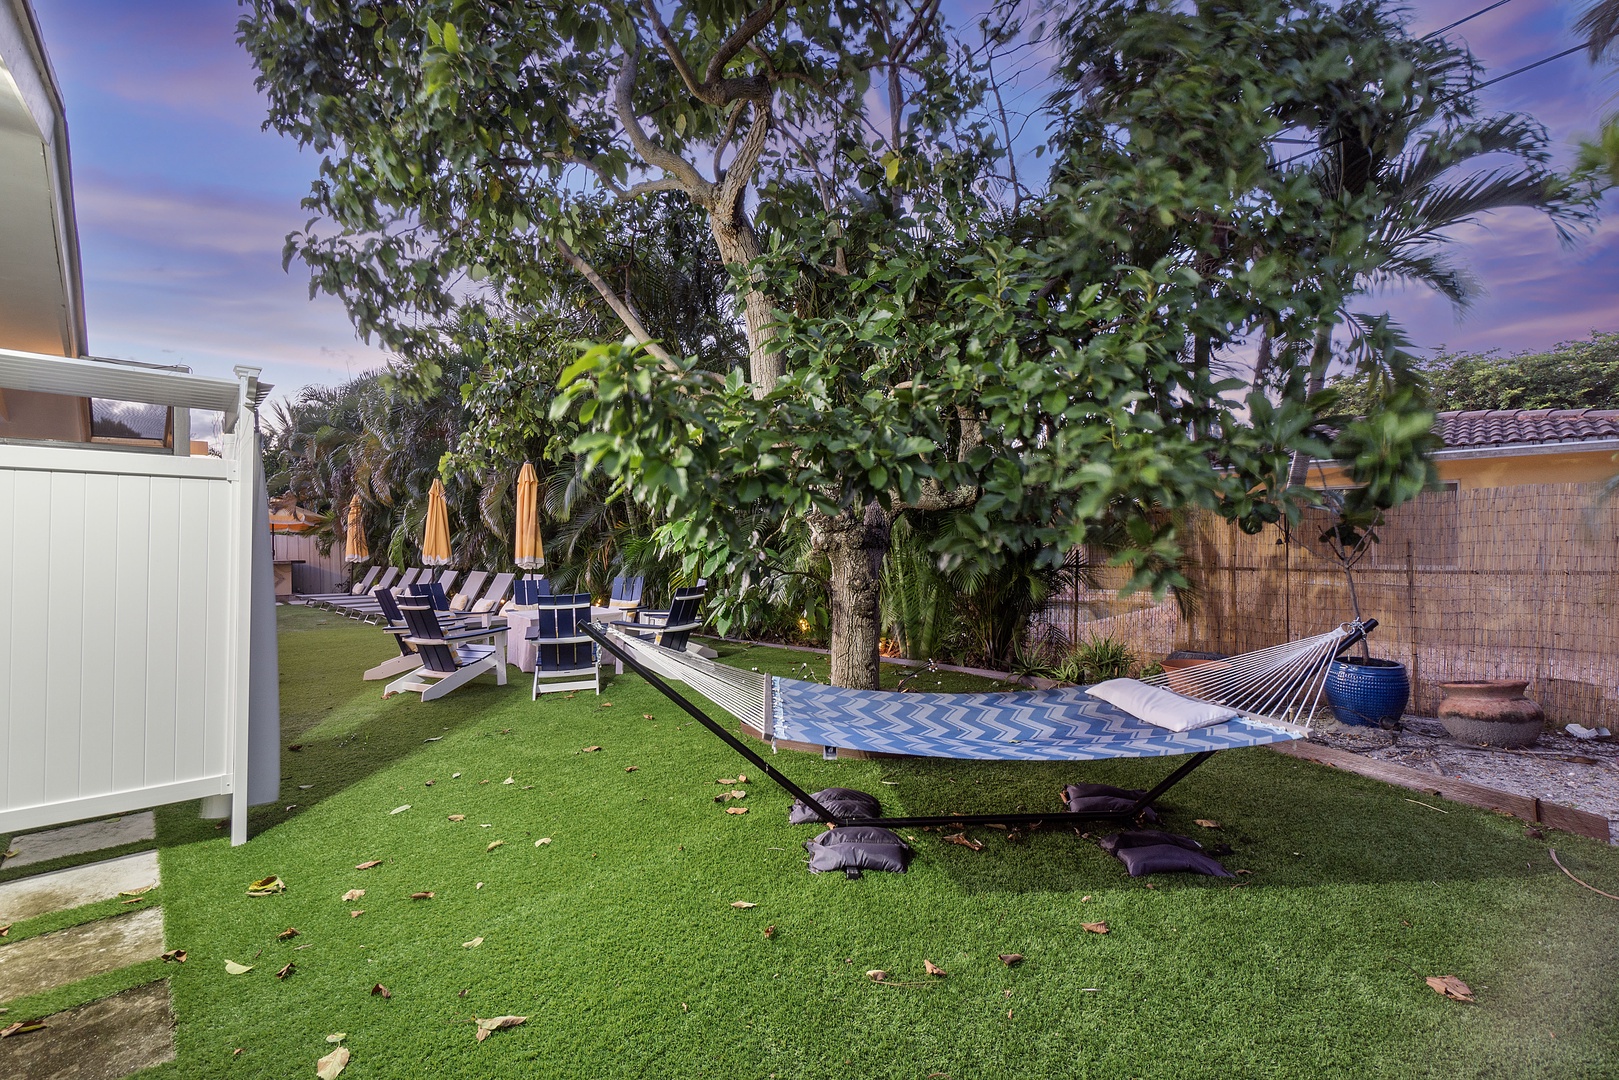 Back yard with covered pool, extensive seating, grill, hammock, and firepit